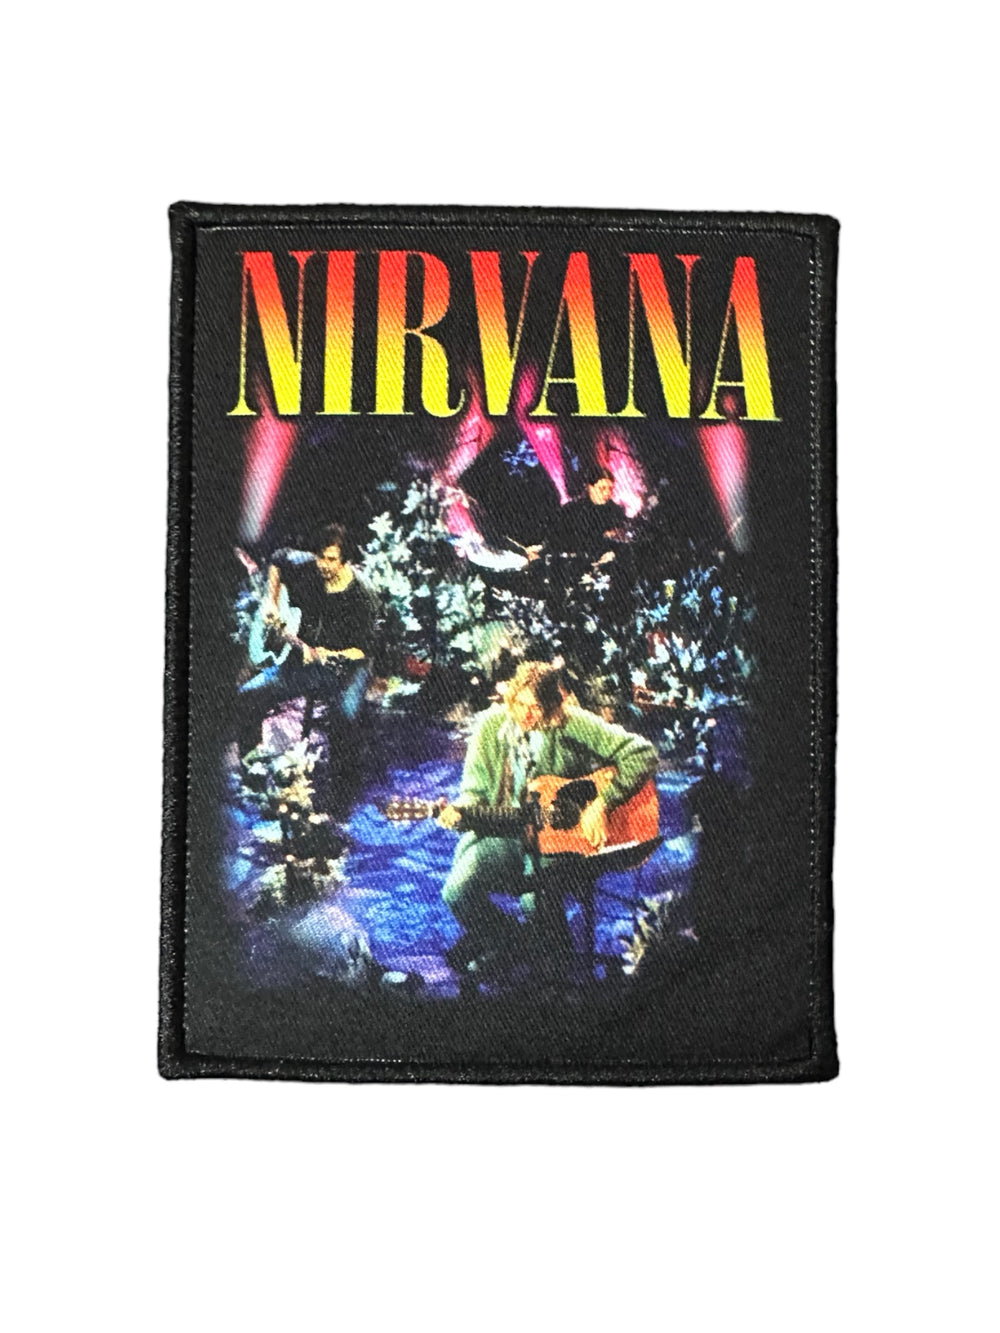 Nirvana Unplugged Photo Official Woven Patch Brand New